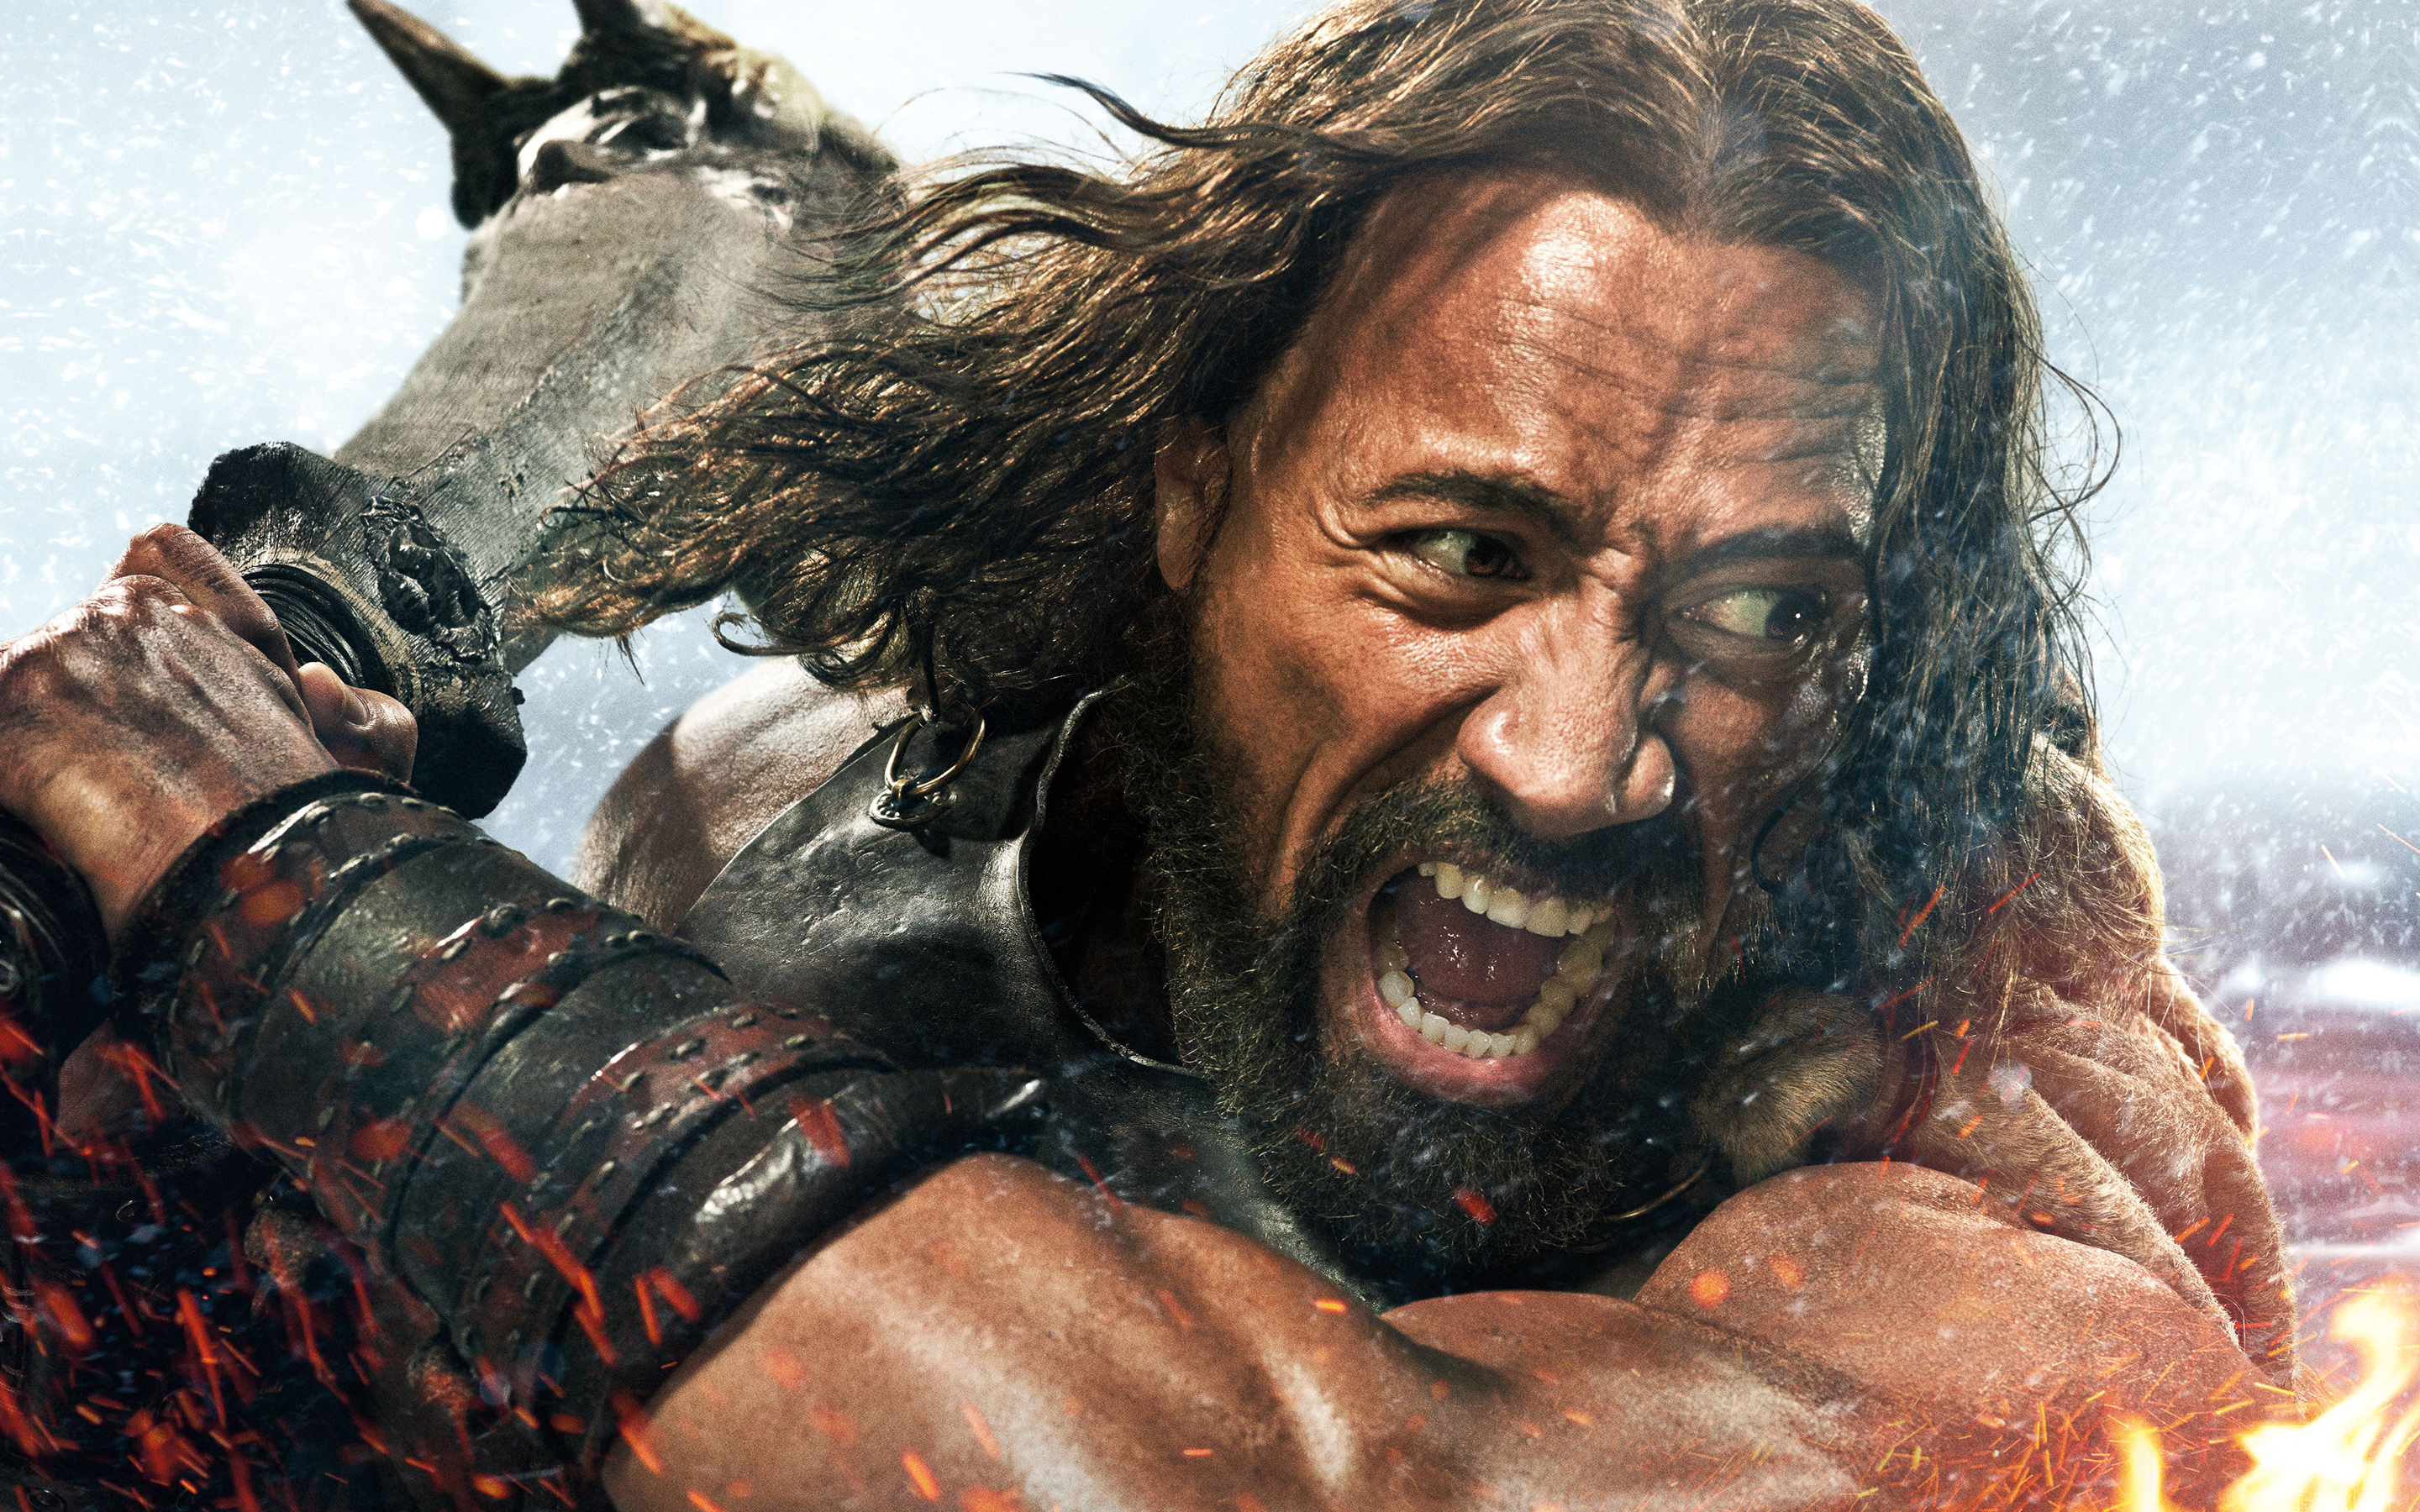 Image gallery for Hercules  FilmAffinity